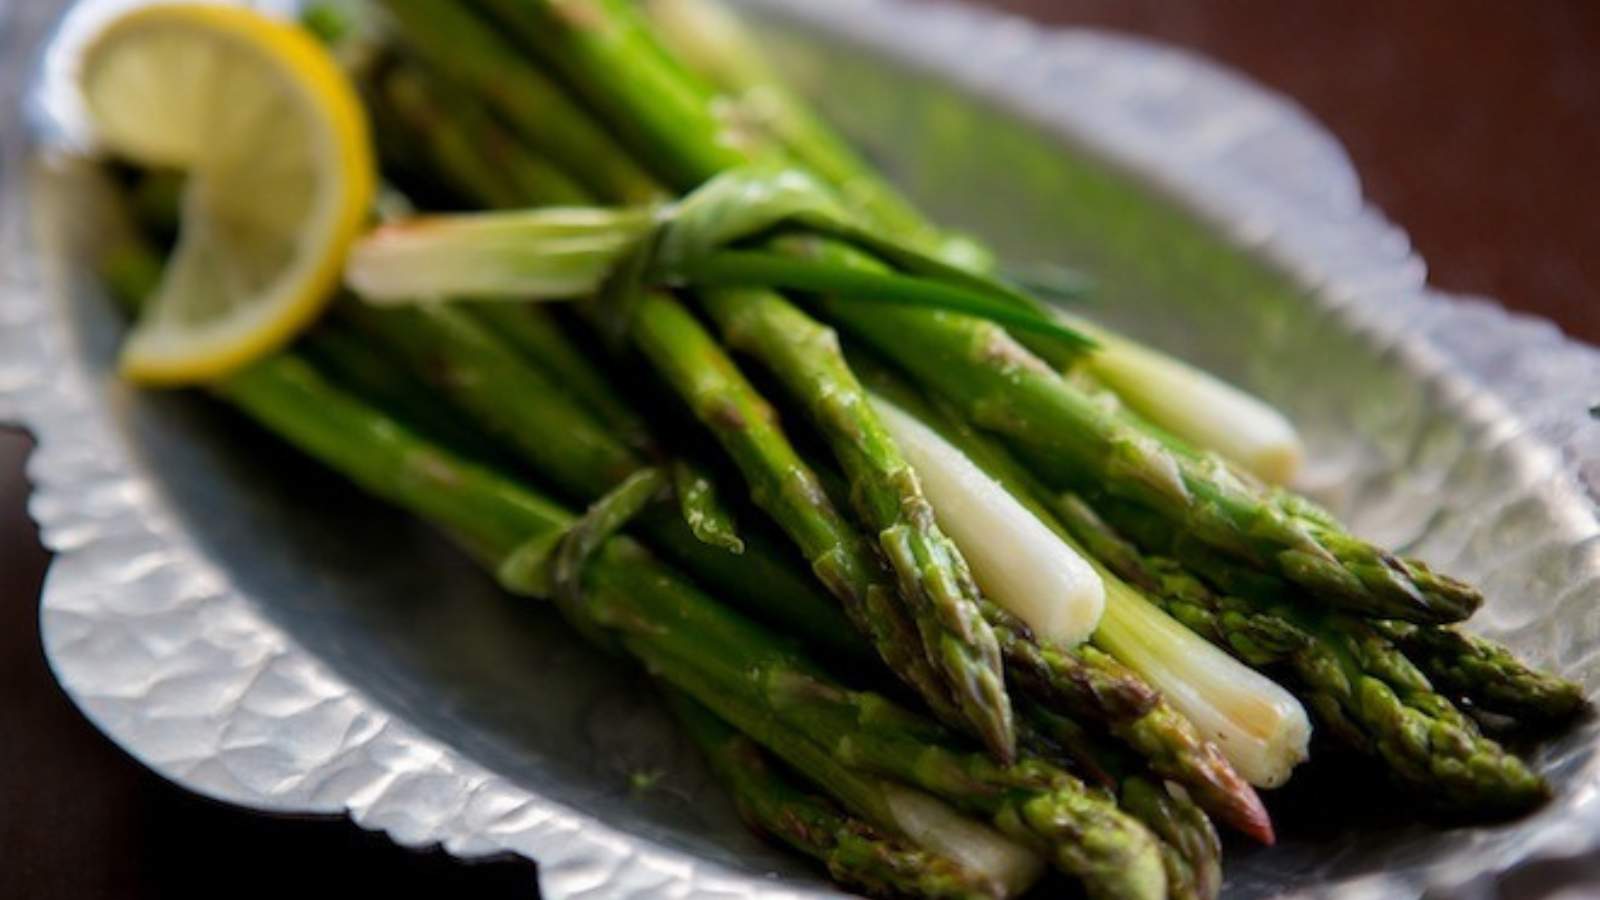 Roasted Asparagus recipe by Learning and Yearning.